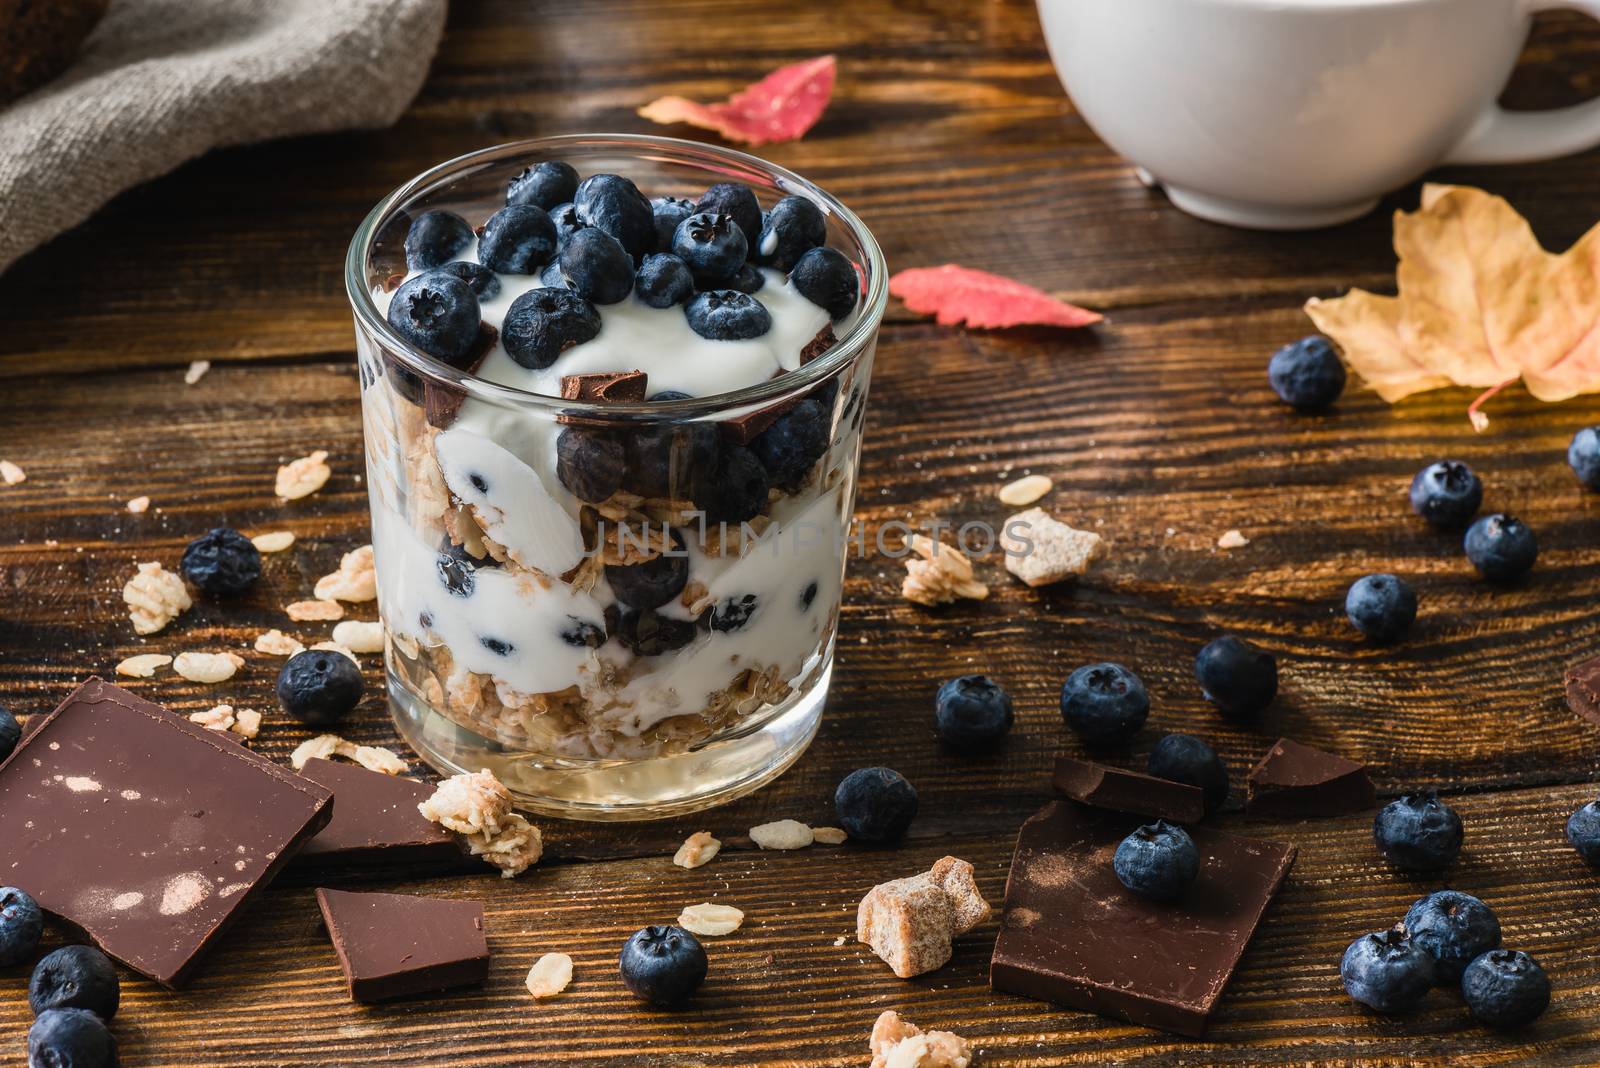 Granola with yogurt, blueberries, honey and chocolate bars on wooden table with ingredients.